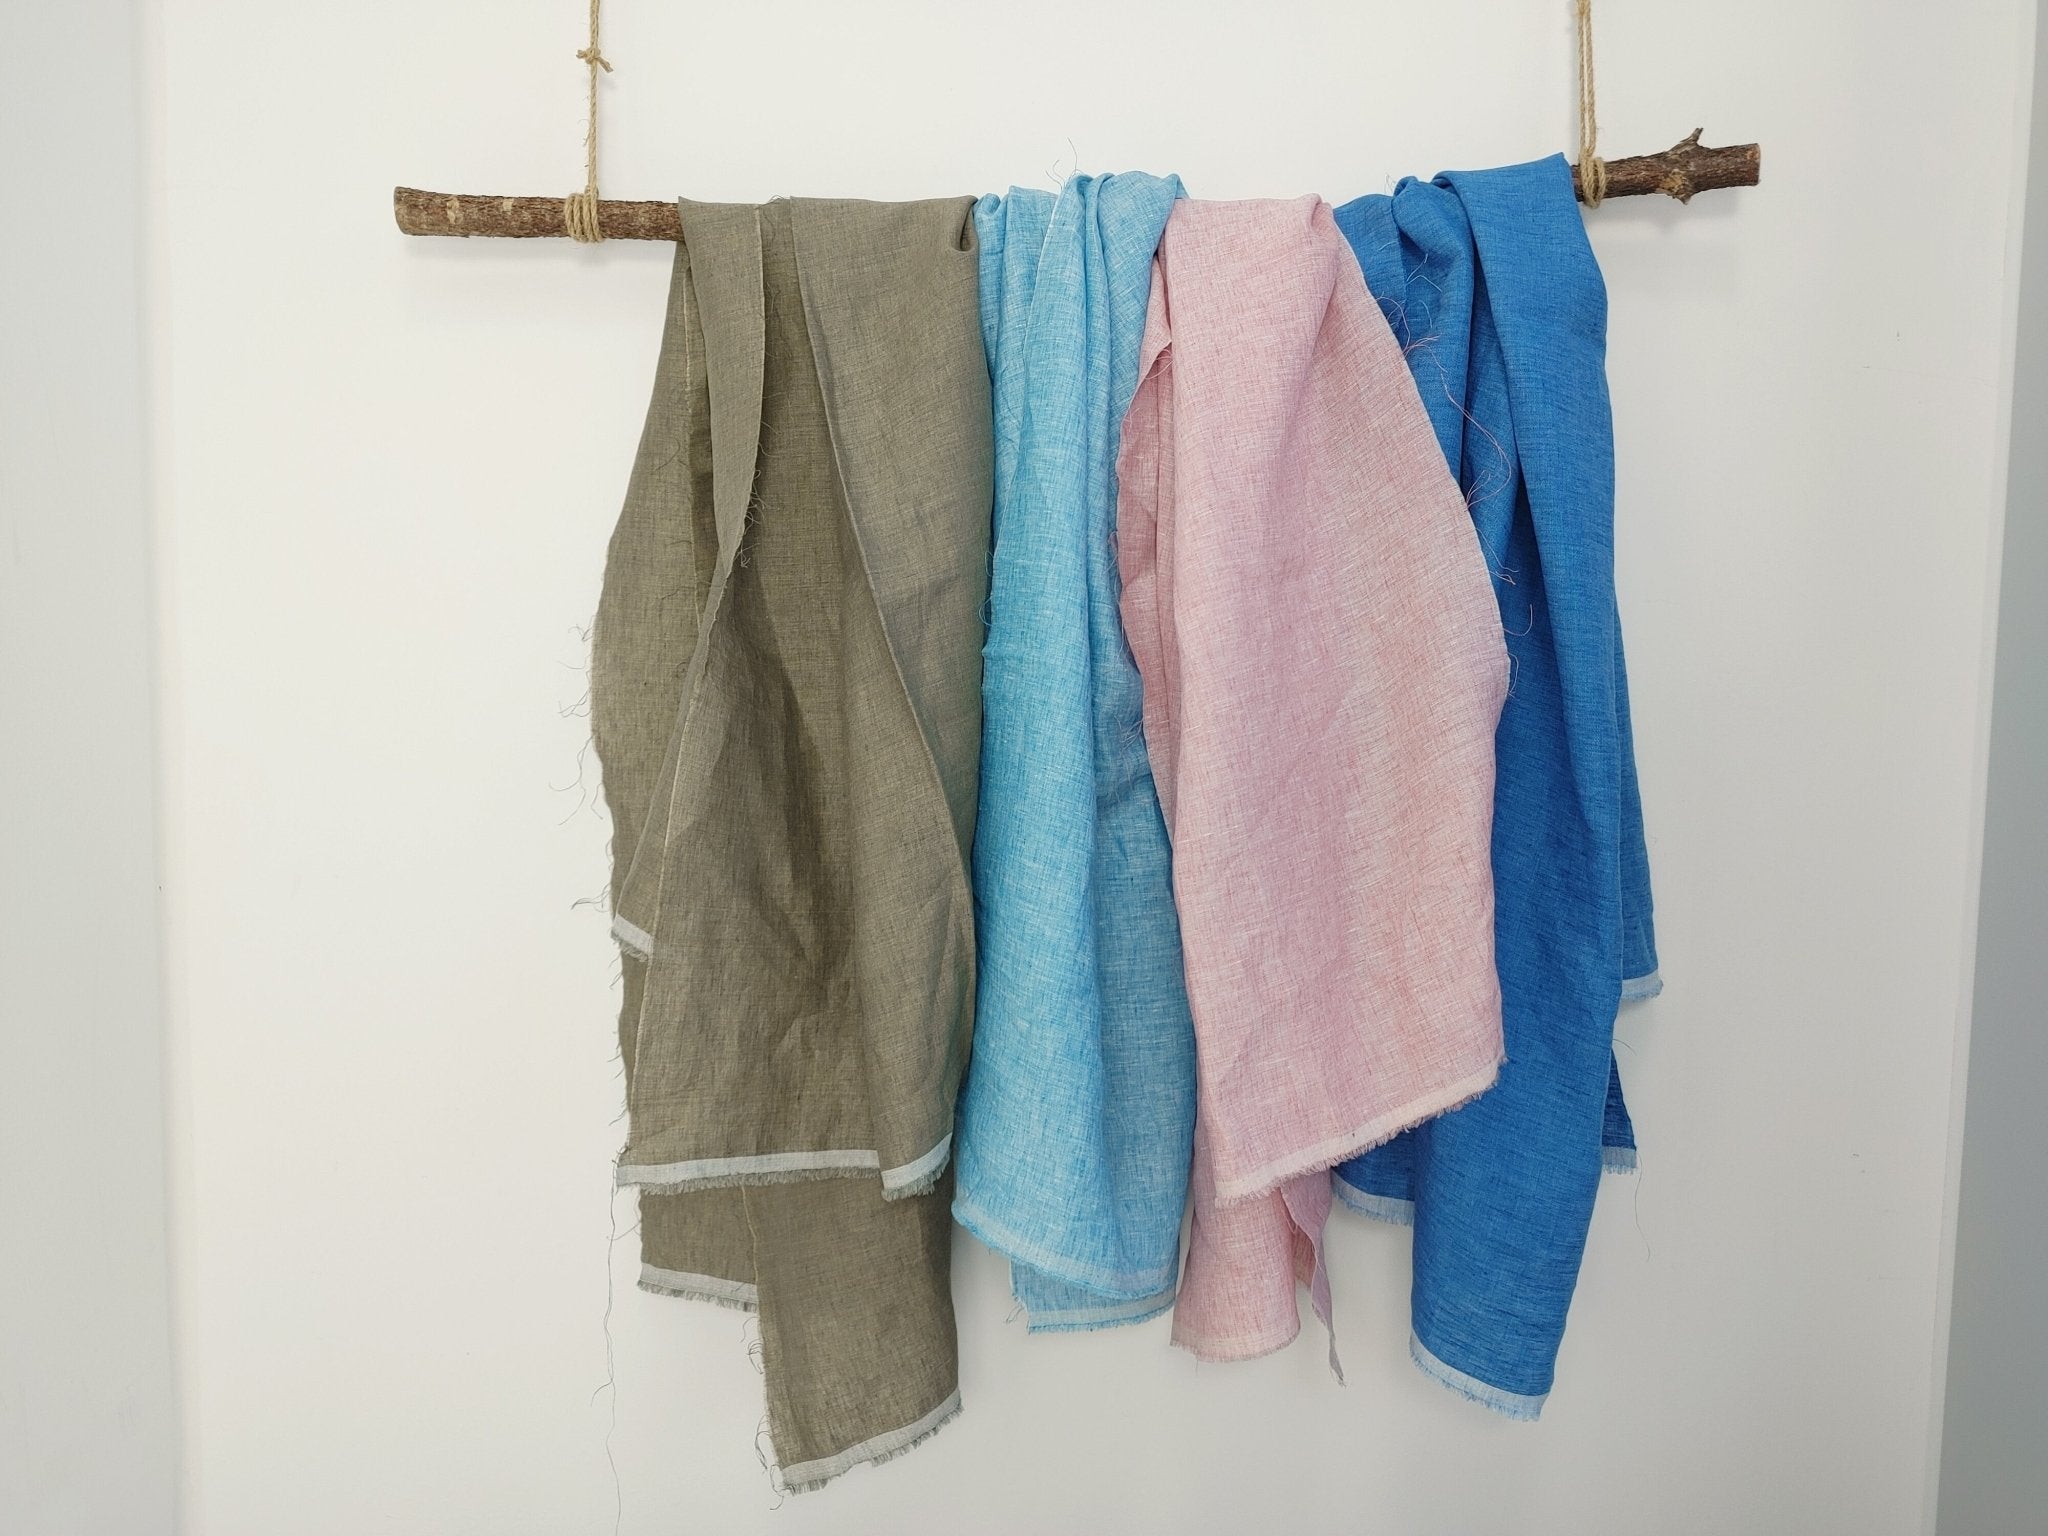 100% Linen Fabric 21s Vintage Chambray New Colorways for 2024 - The Linen Lab - Blue(light)